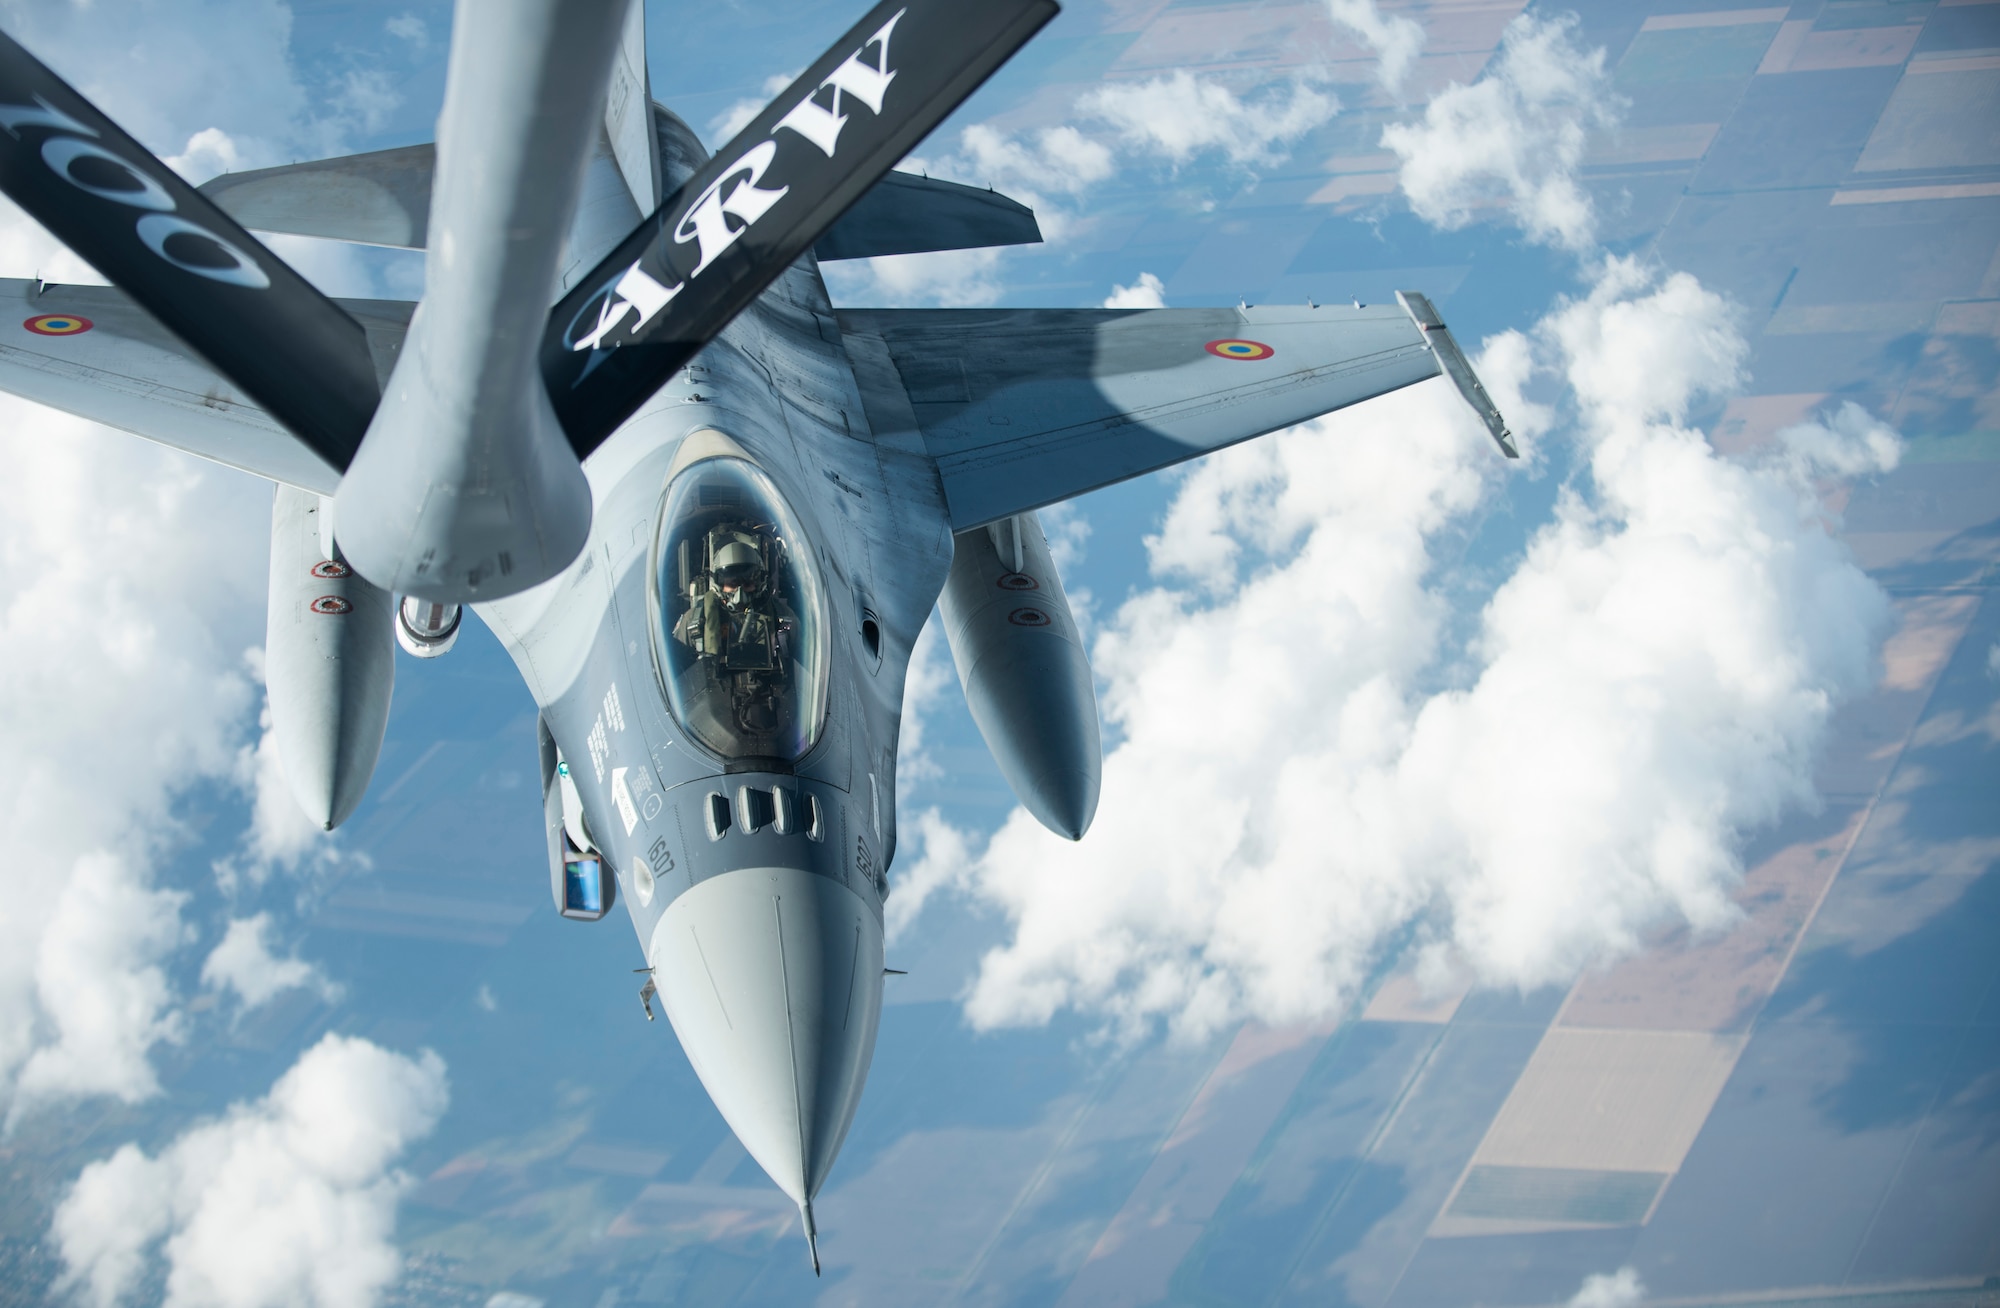 A Romanian Air Force F-16 prepares to receive fuel from a KC-135 Stratotanker from the 100th Air Refueling Wing, RAF Mildenhall, England, over Romania Sept. 13, 2018. Training with NATO allies such Romania improves interoperability and demonstrates the United States’ commitment to regional security. (U.S. Air Force photo by Tech. Sgt. Emerson Nuñez)